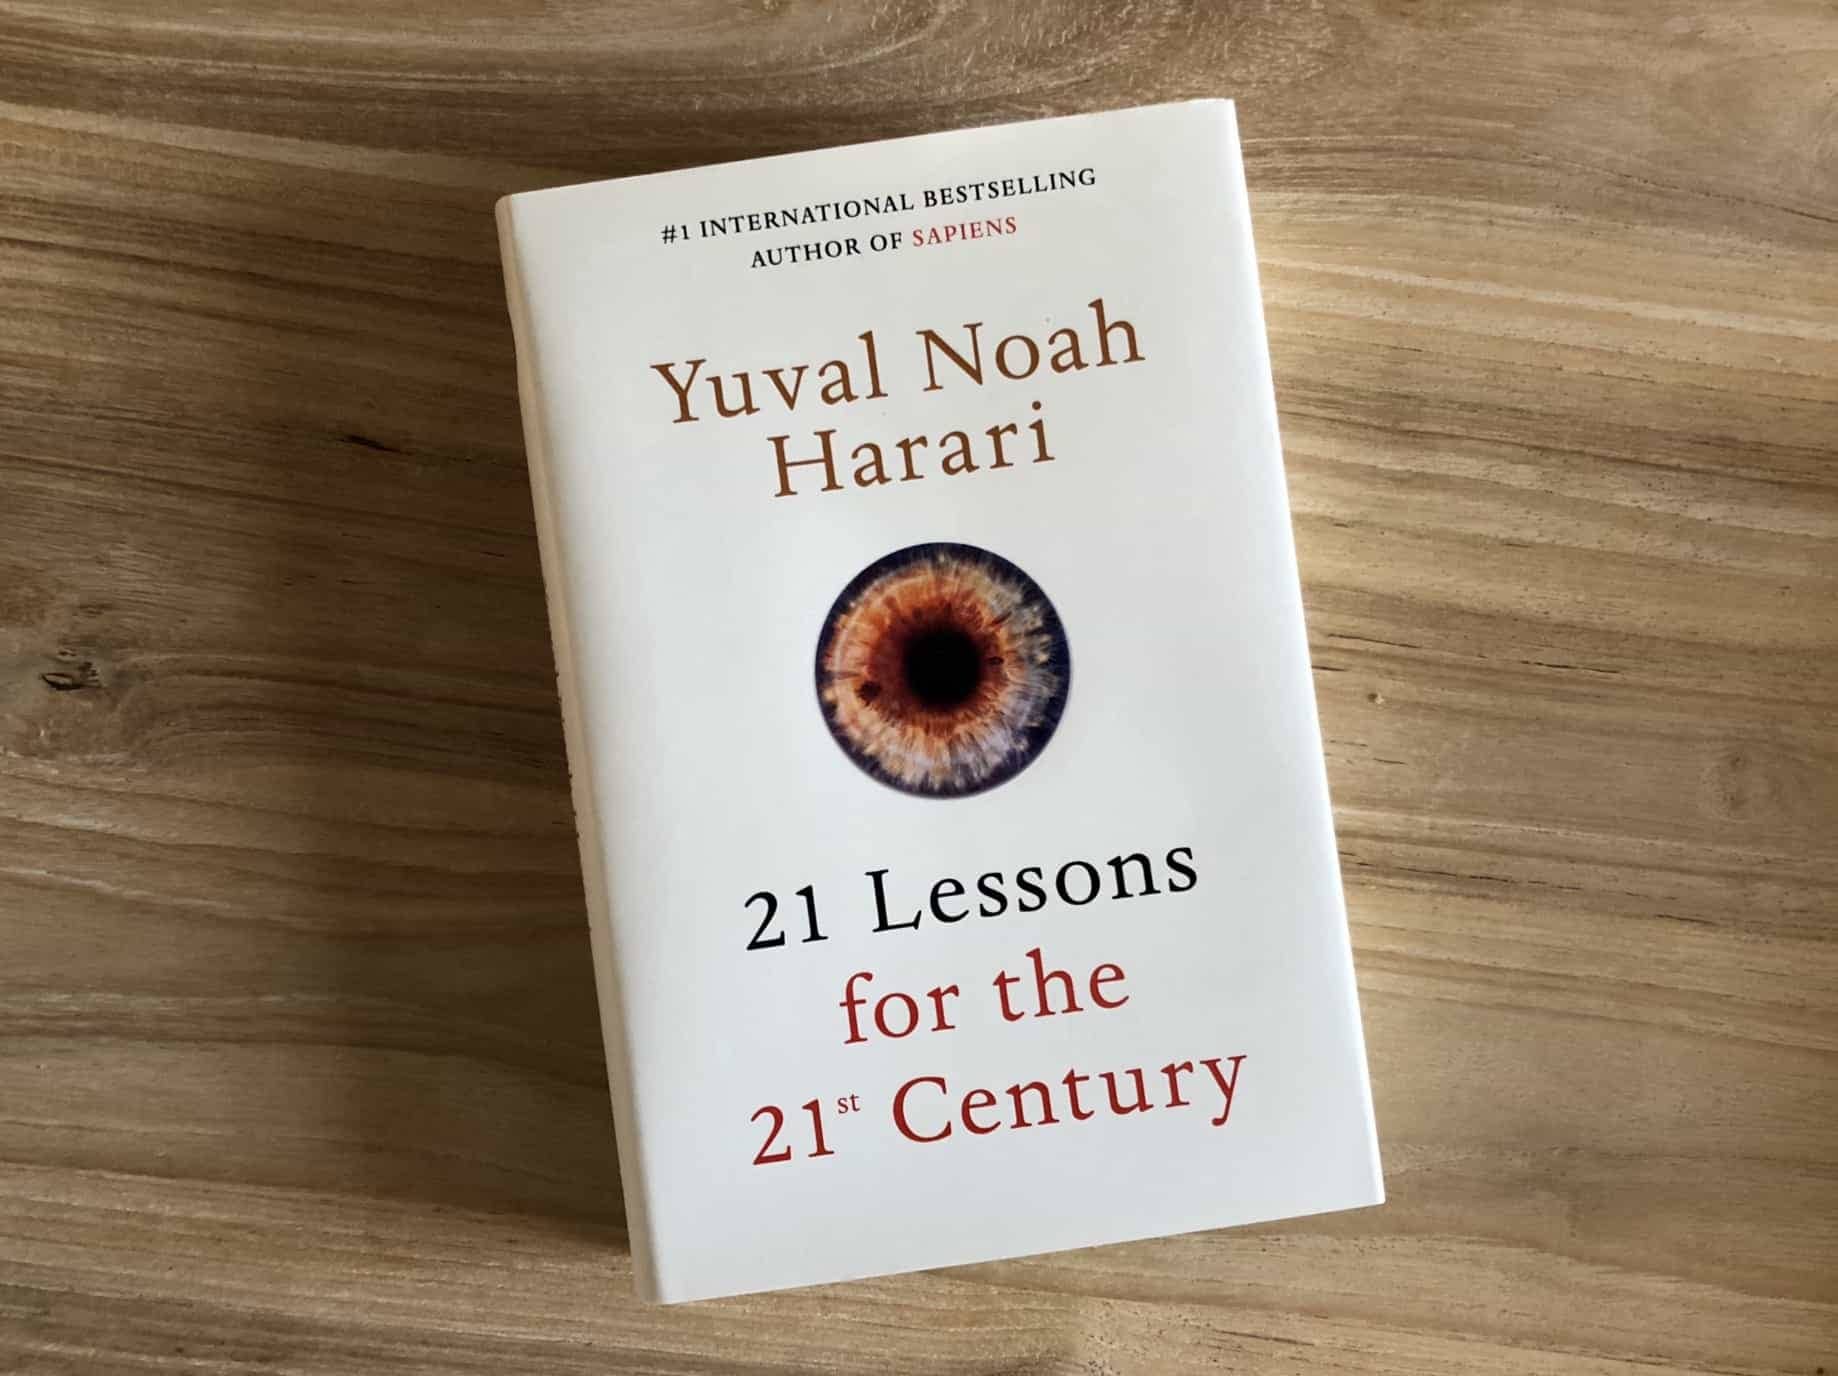 What we’re reading: ’21 lessons for the 21st century’; Yuval Noah Harari